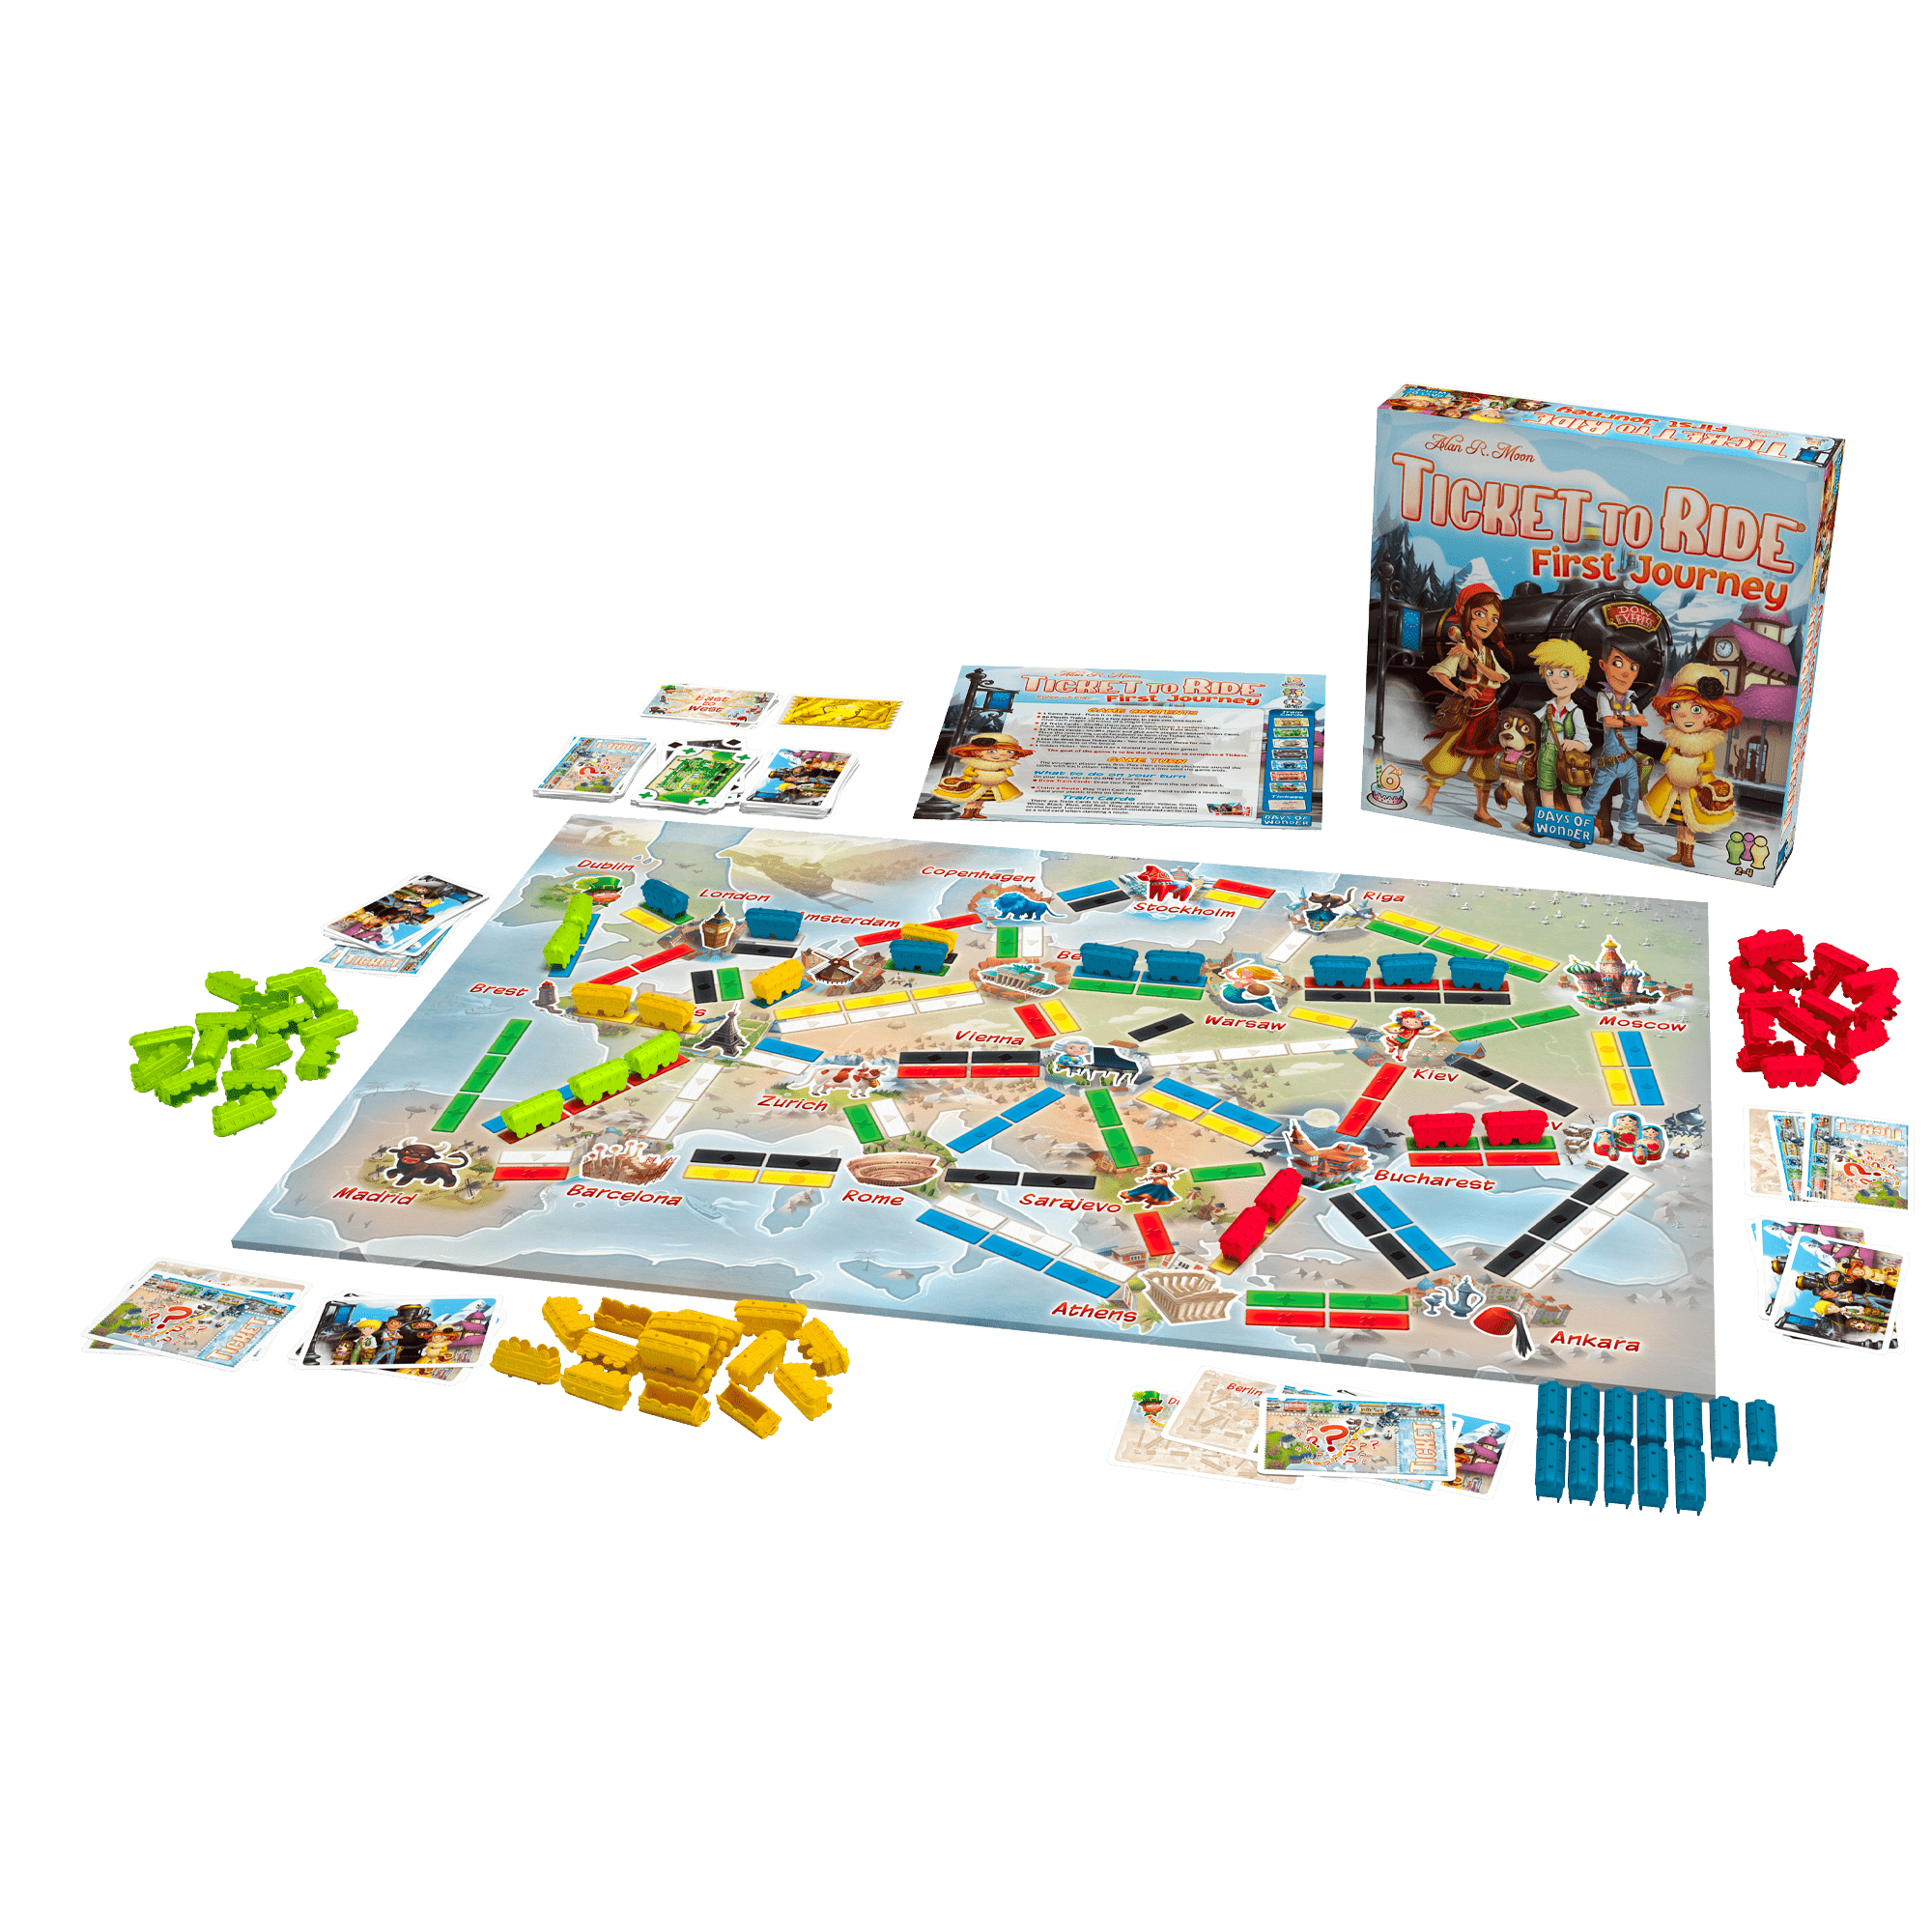 Ticket to Ride - First Journey - Europe